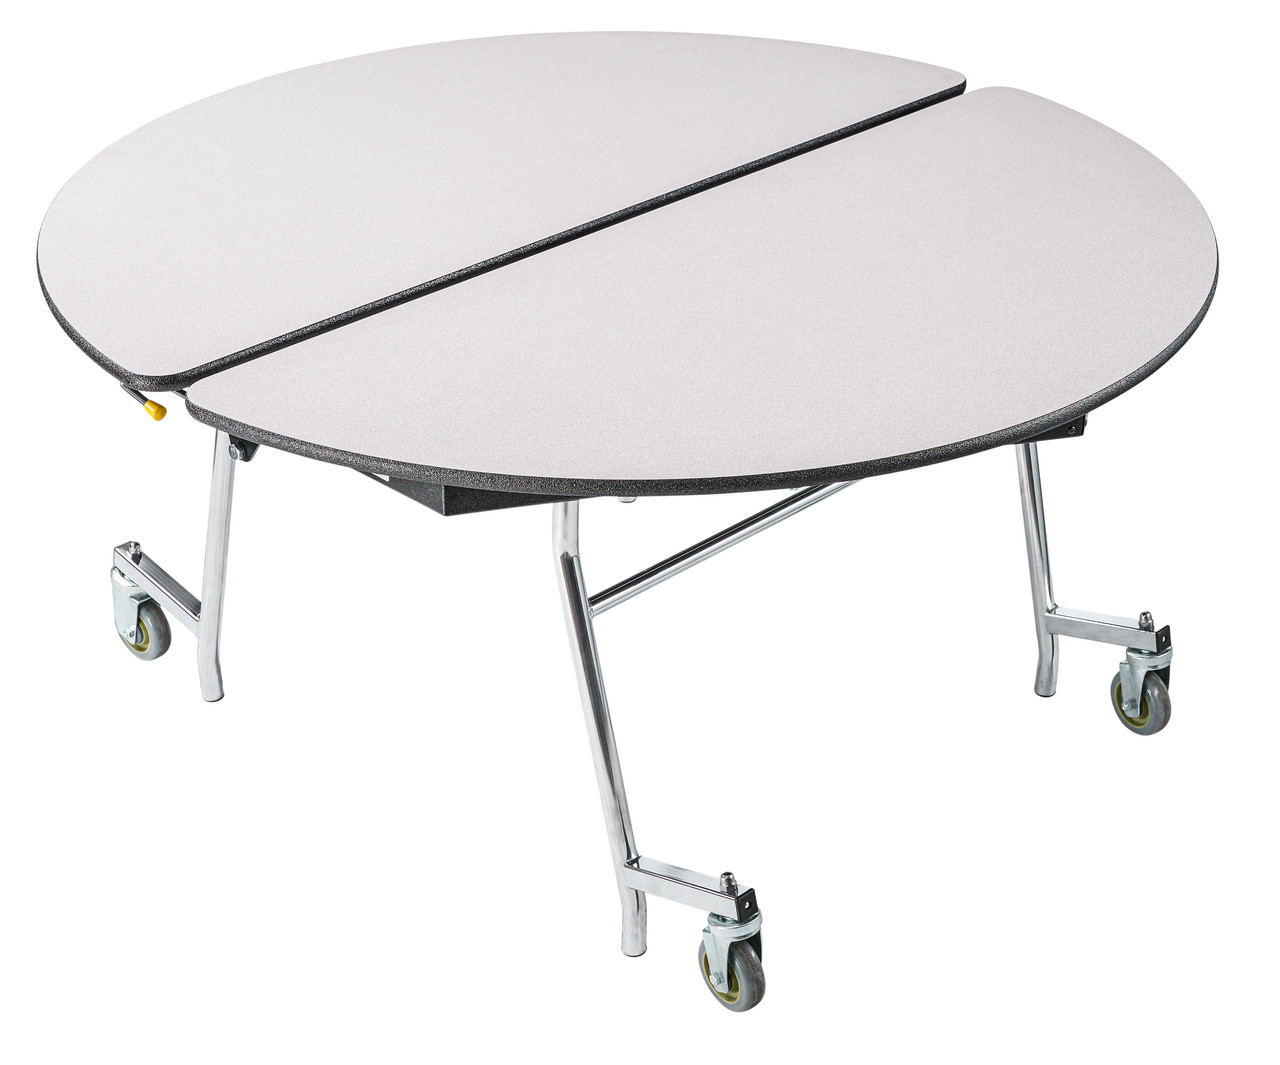 nps-mobile-cafeteria-table-60-round-plywood-core-protectedge/